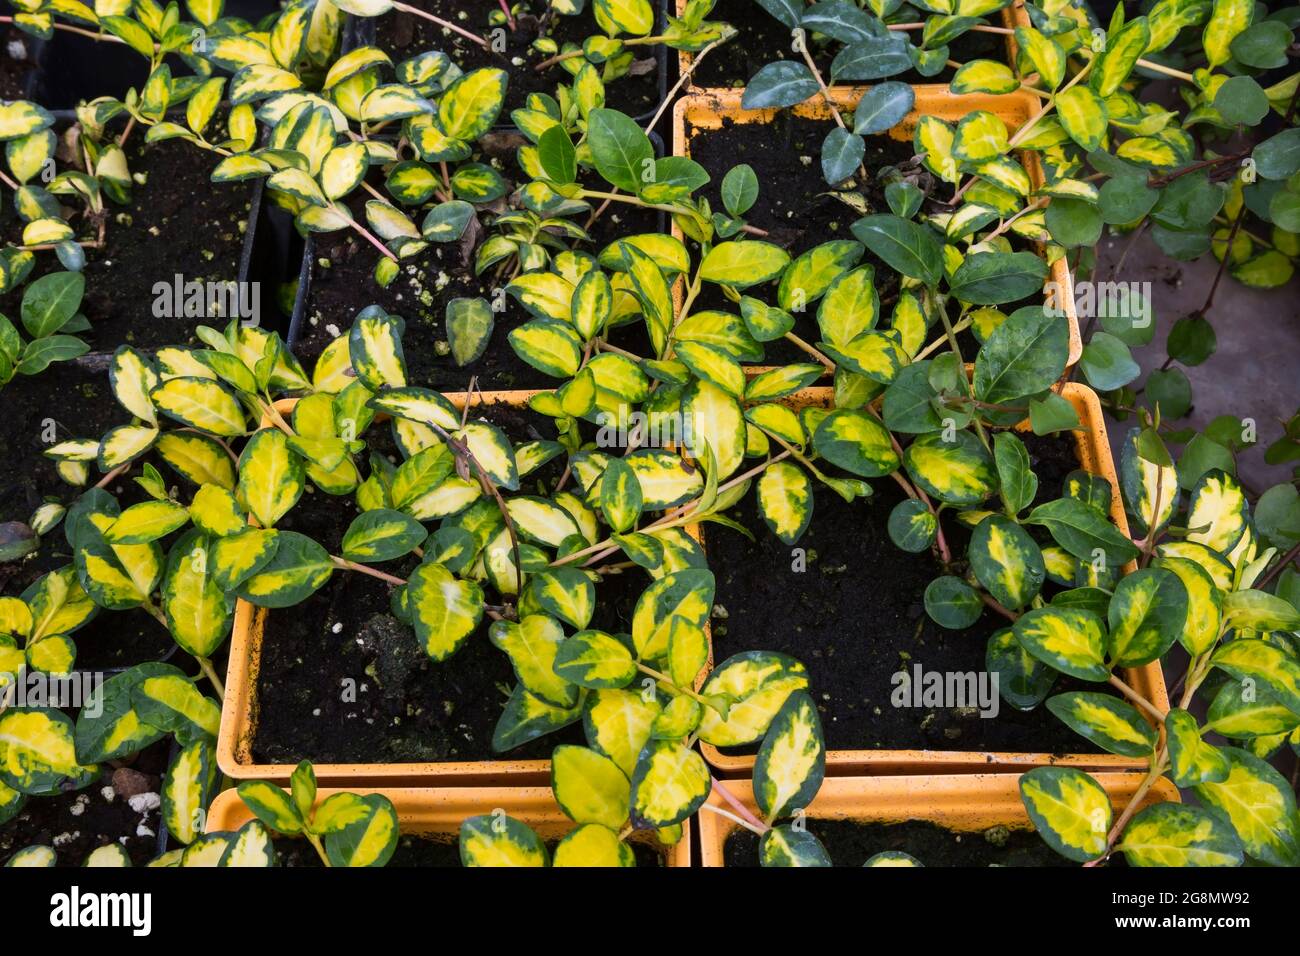 Euonymus fortunei - Spindle tree shrubs with green variegated yellow leaves growing in plastic containers inside a greenhouse Stock Photo